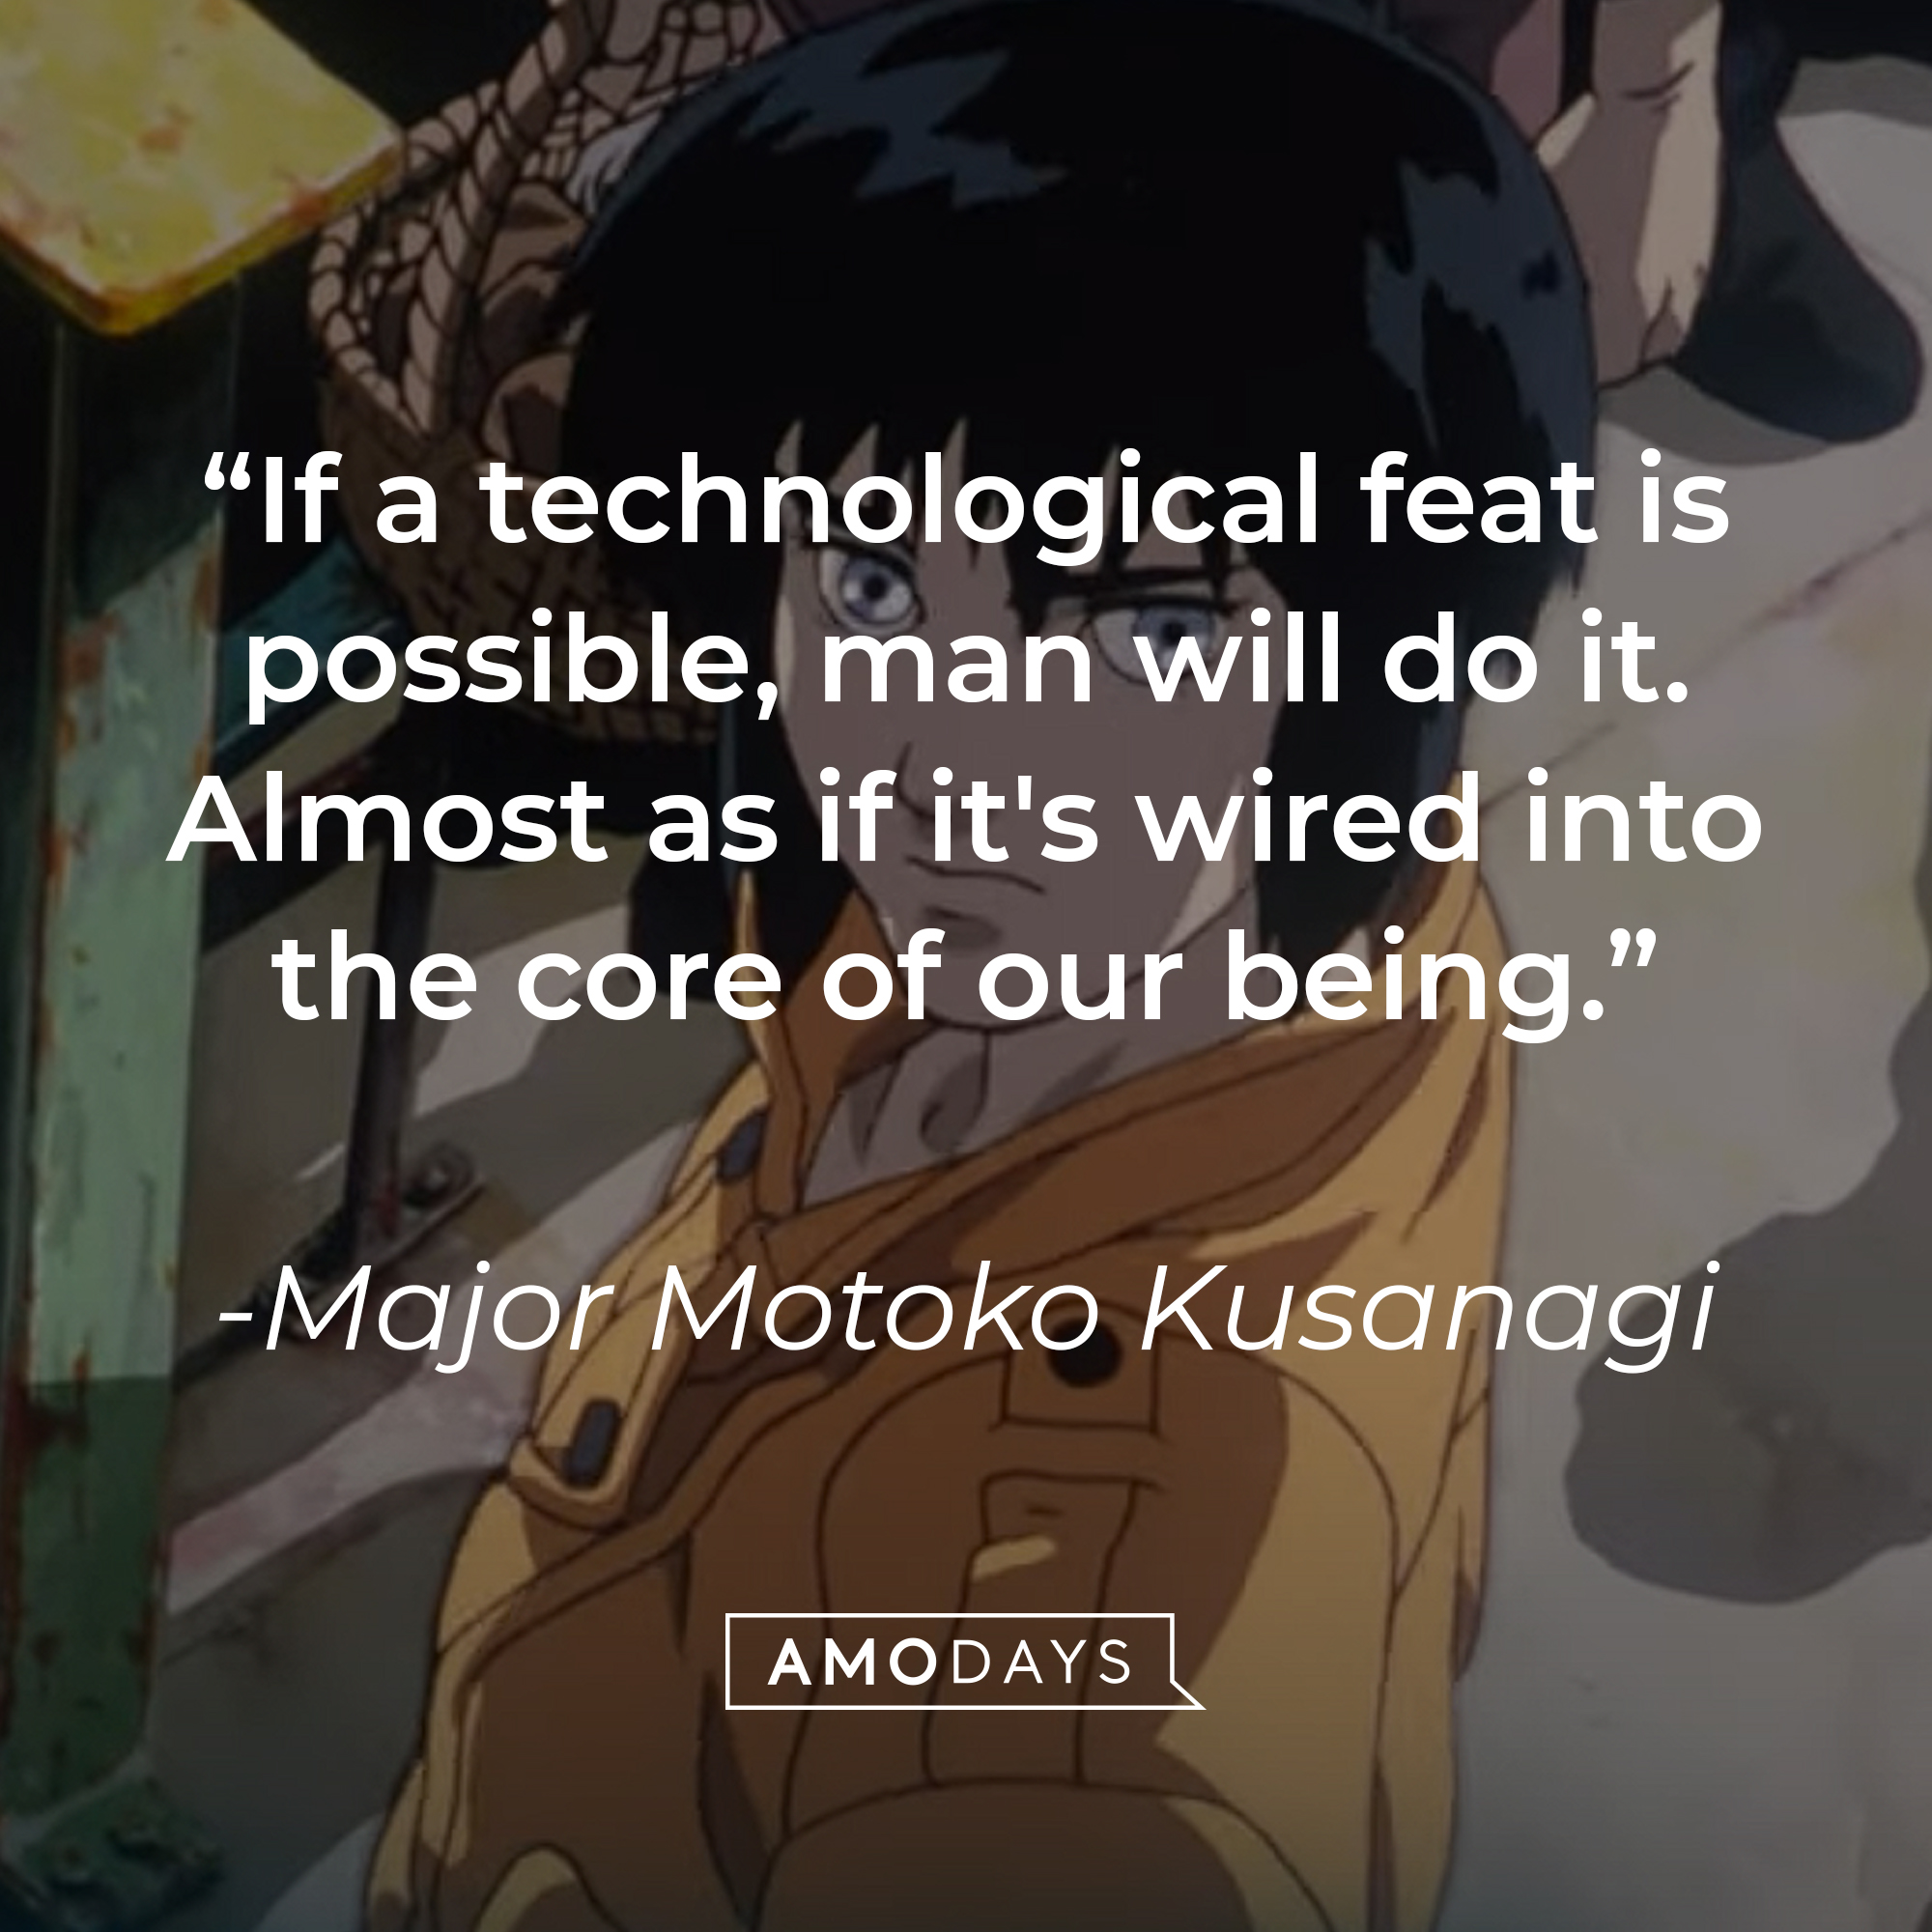 Major Motoko Kusanagi with her quote: "If a technological feat is possible, man will do it. Almost as if it's wired into the core of our being." | Source: YouTube.com/LionsgateMovies